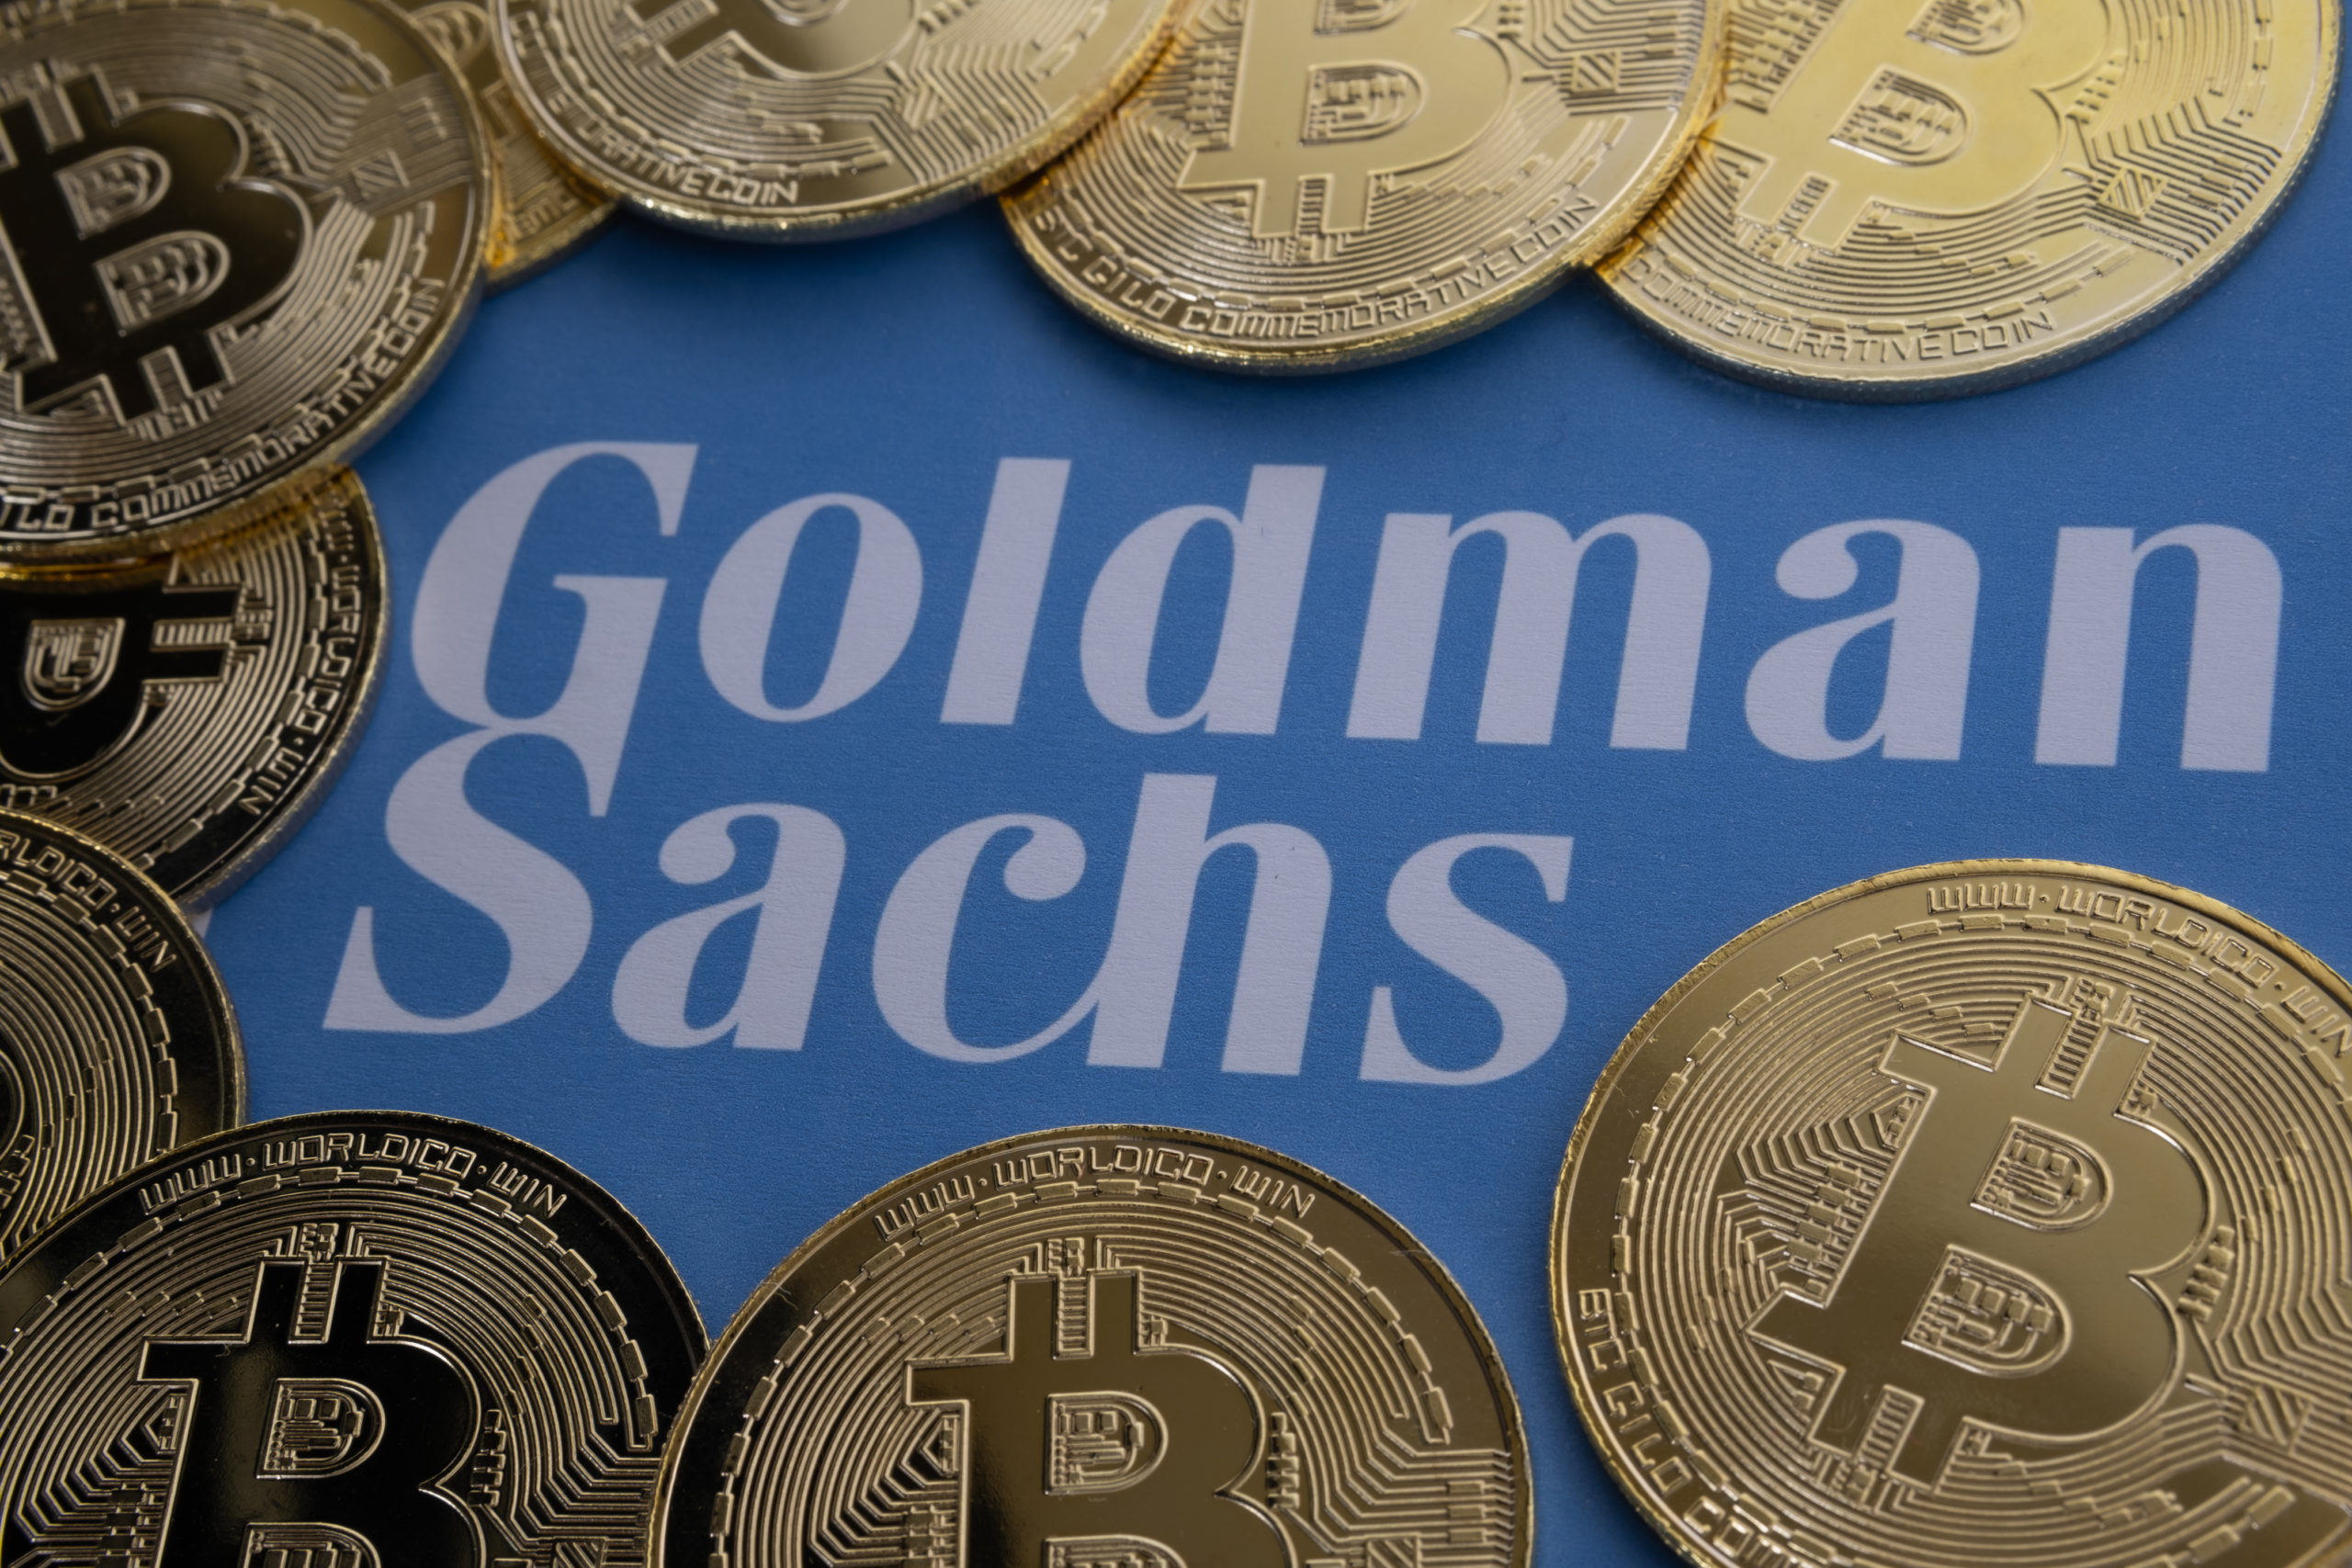 Goldman Sachs’ Digital-Asset Team Ready to Expand with New Blockchain Platform – Is the Bear Market Over?